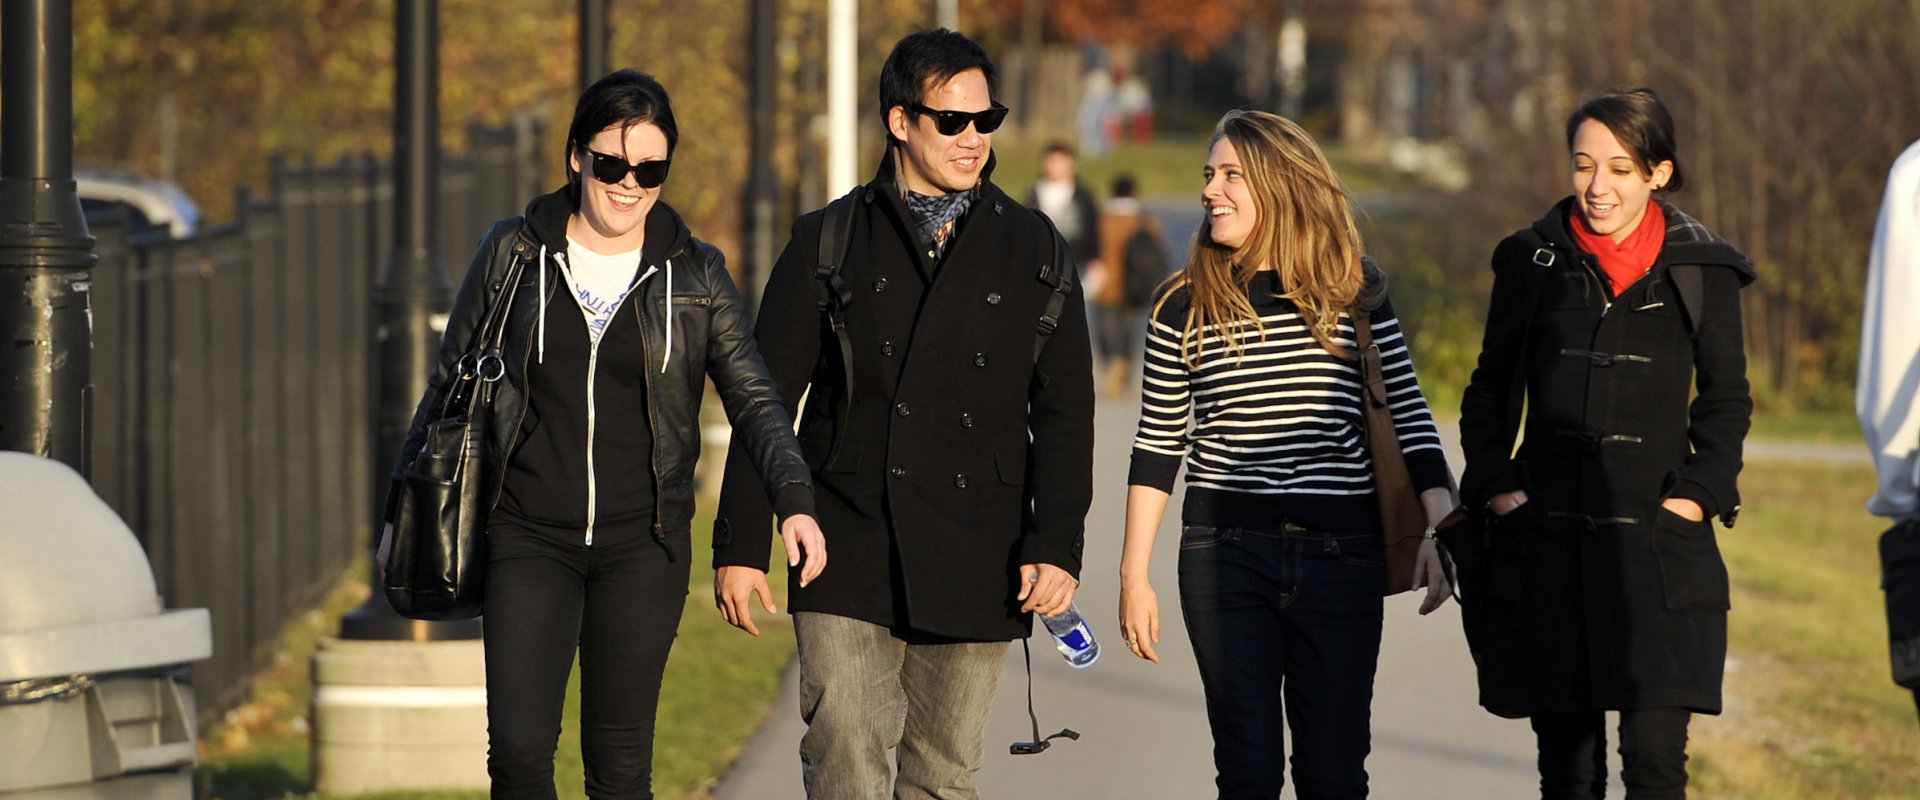 Four students walking on a path at Humber in the fall; trees with coloured leaves can be seen in the background.